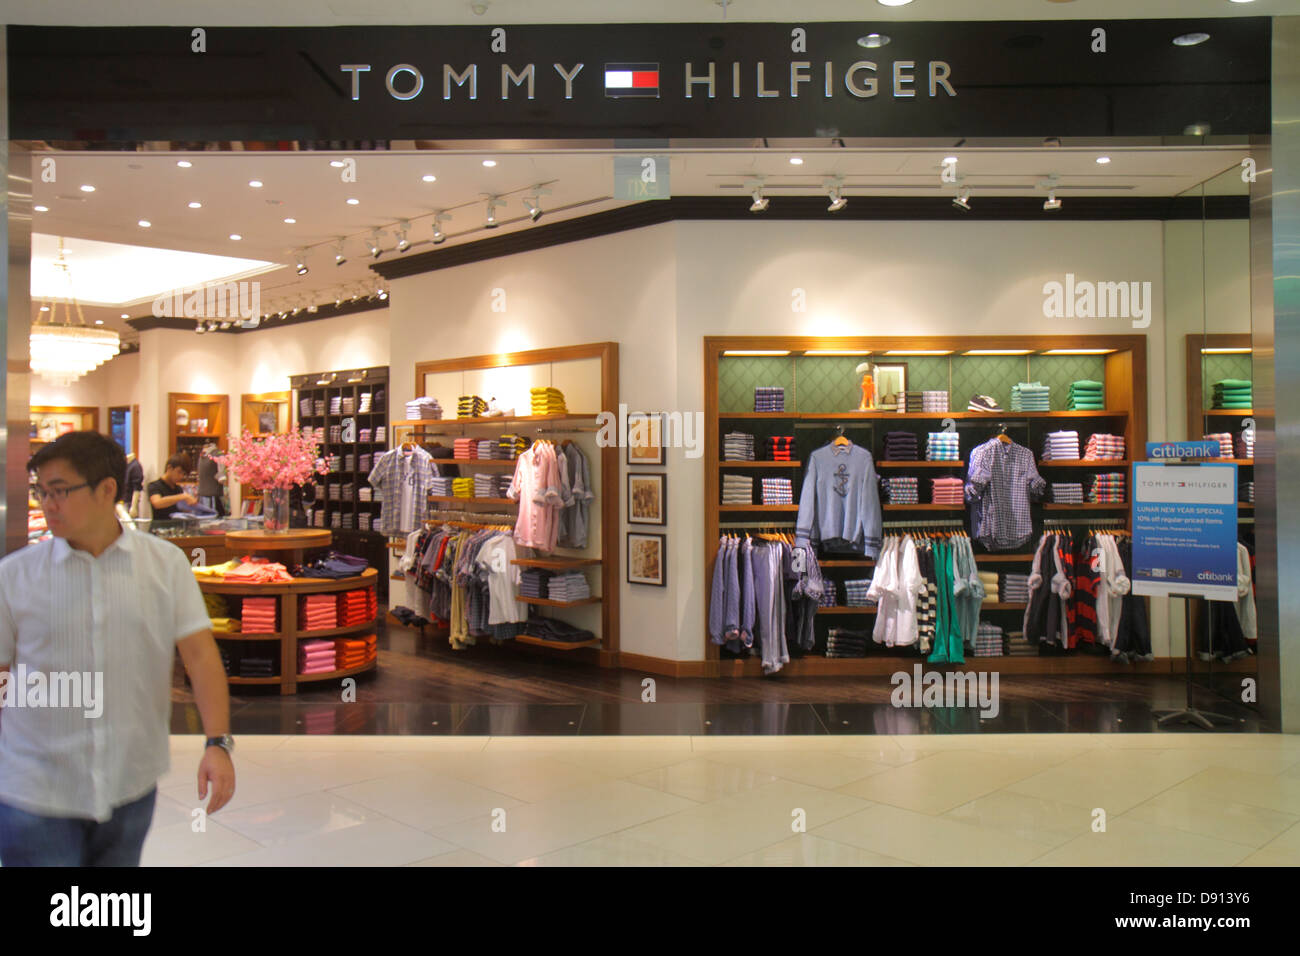 Tommy Hilfiger Store Display High Resolution Stock Photography and Images -  Alamy